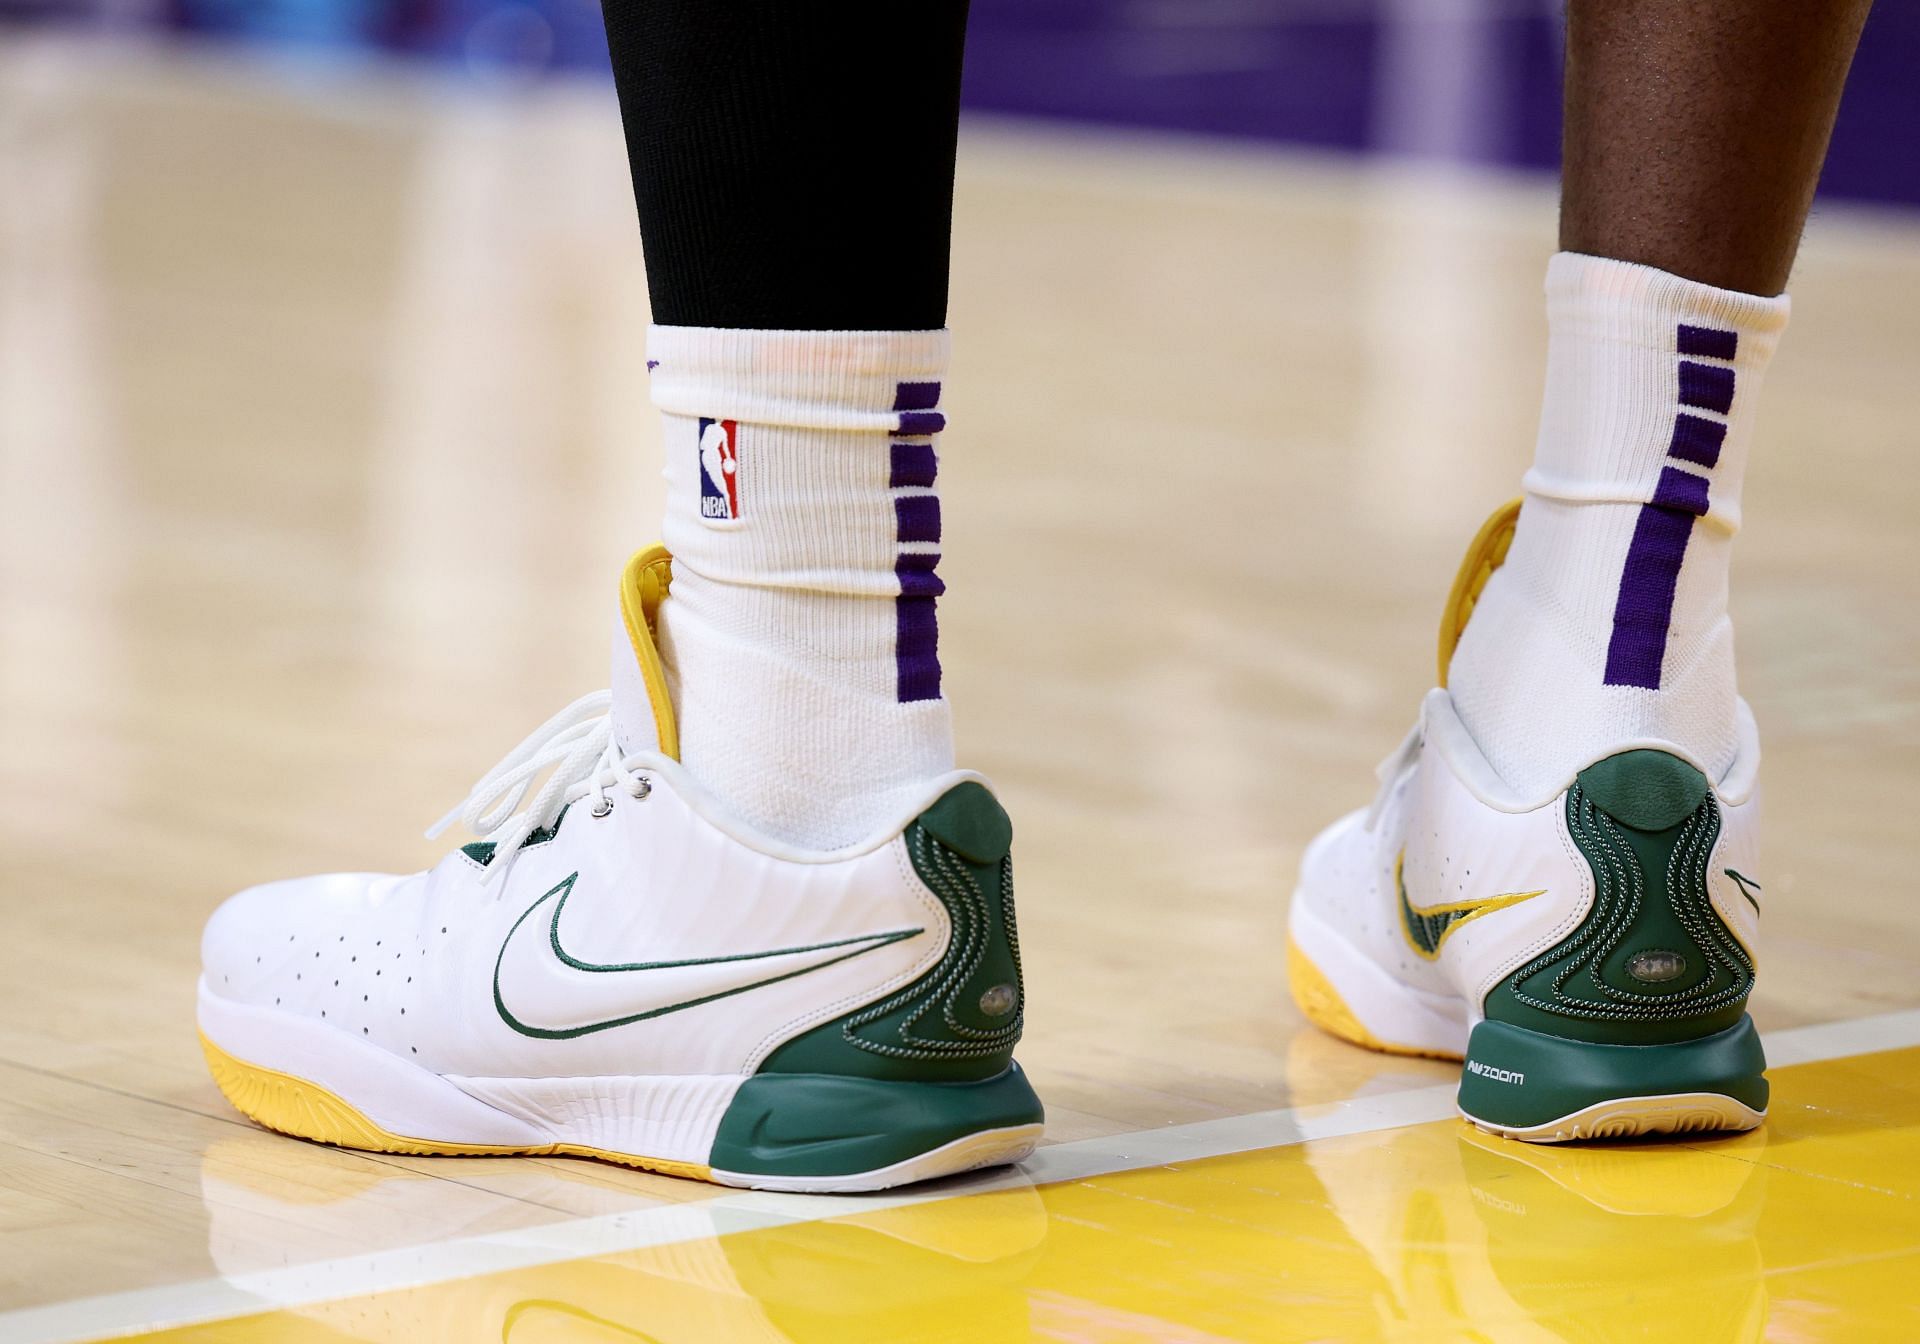 IN PHOTOS: LeBron James debuts Baylor-Inspired Nike 21 PE against Blazers